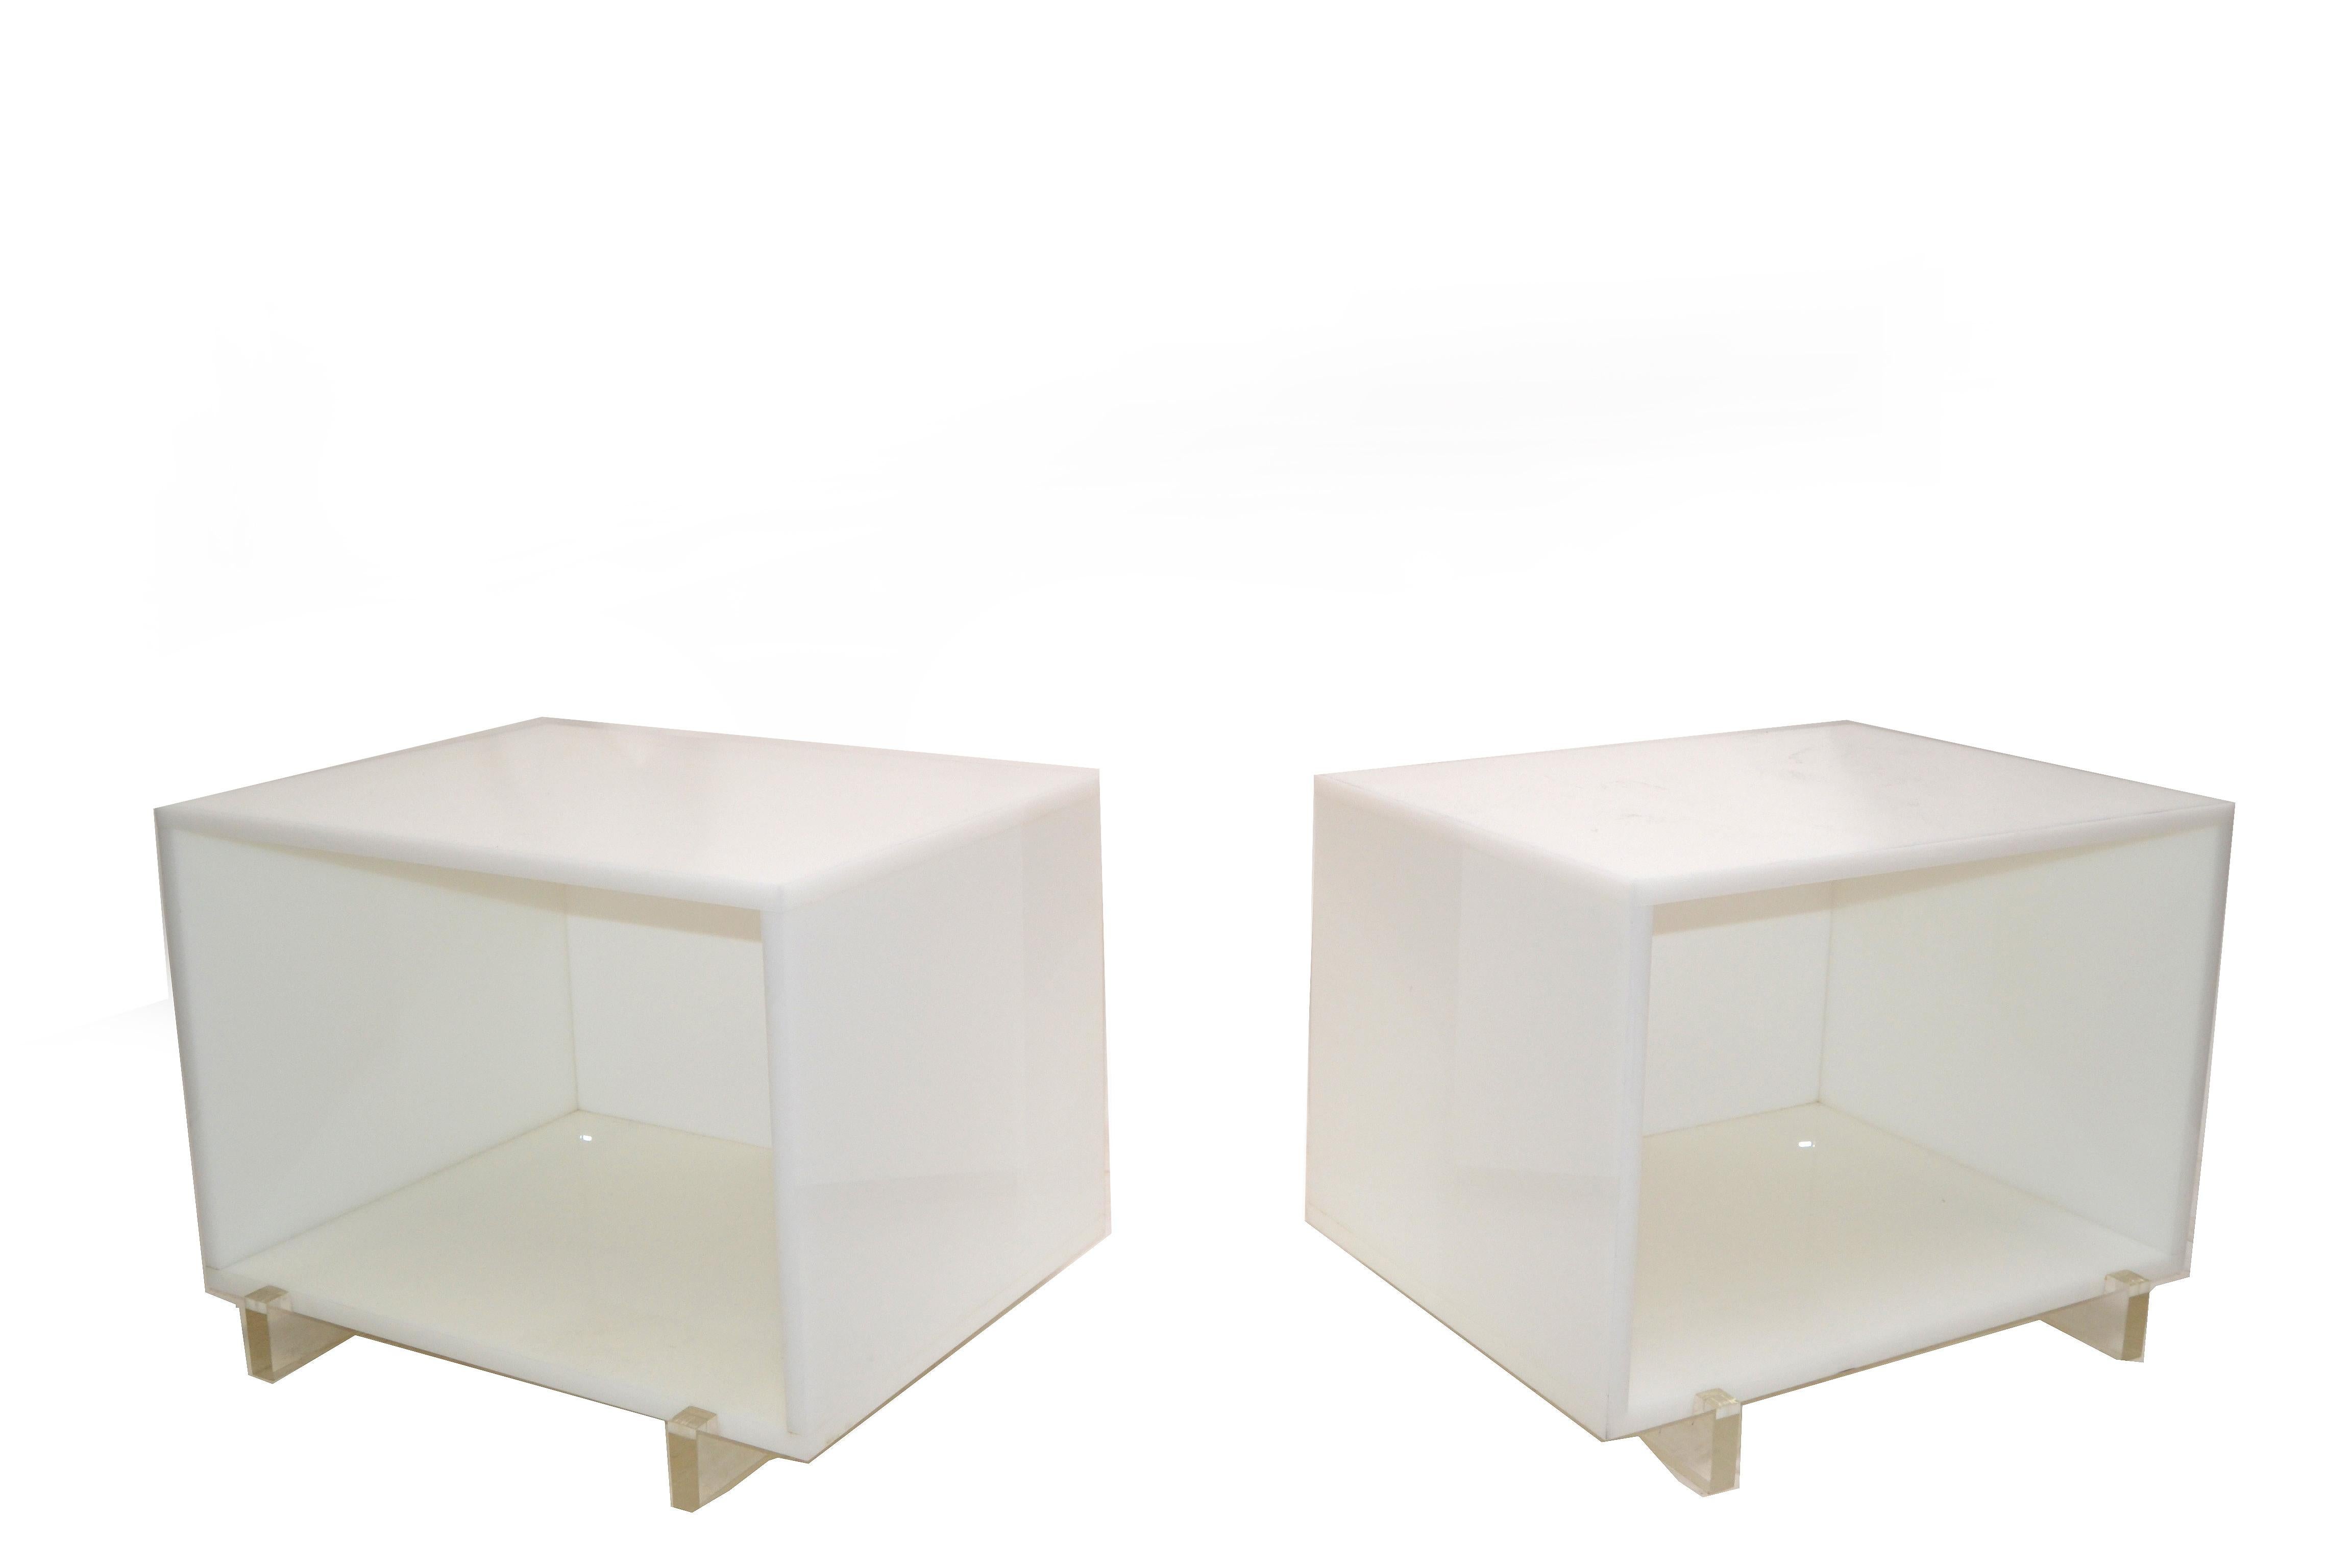 Pair of Mid-Century Modern side tables in white & clear Lucite, made in America in the 1980.
Great also for your bedroom as night stands or bedside tables.
Decoration not included.